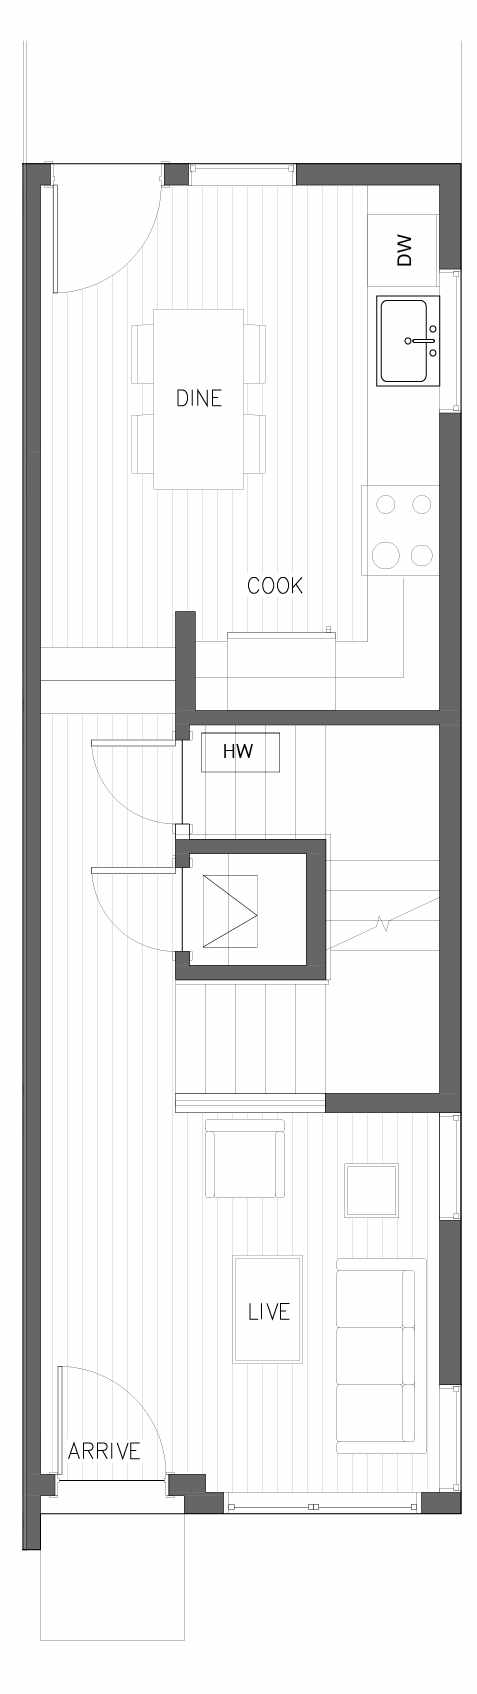 First Floor Plan of 5614 NE 60th St., One of the Kendal Townhomes in Windermere by Isola Homes